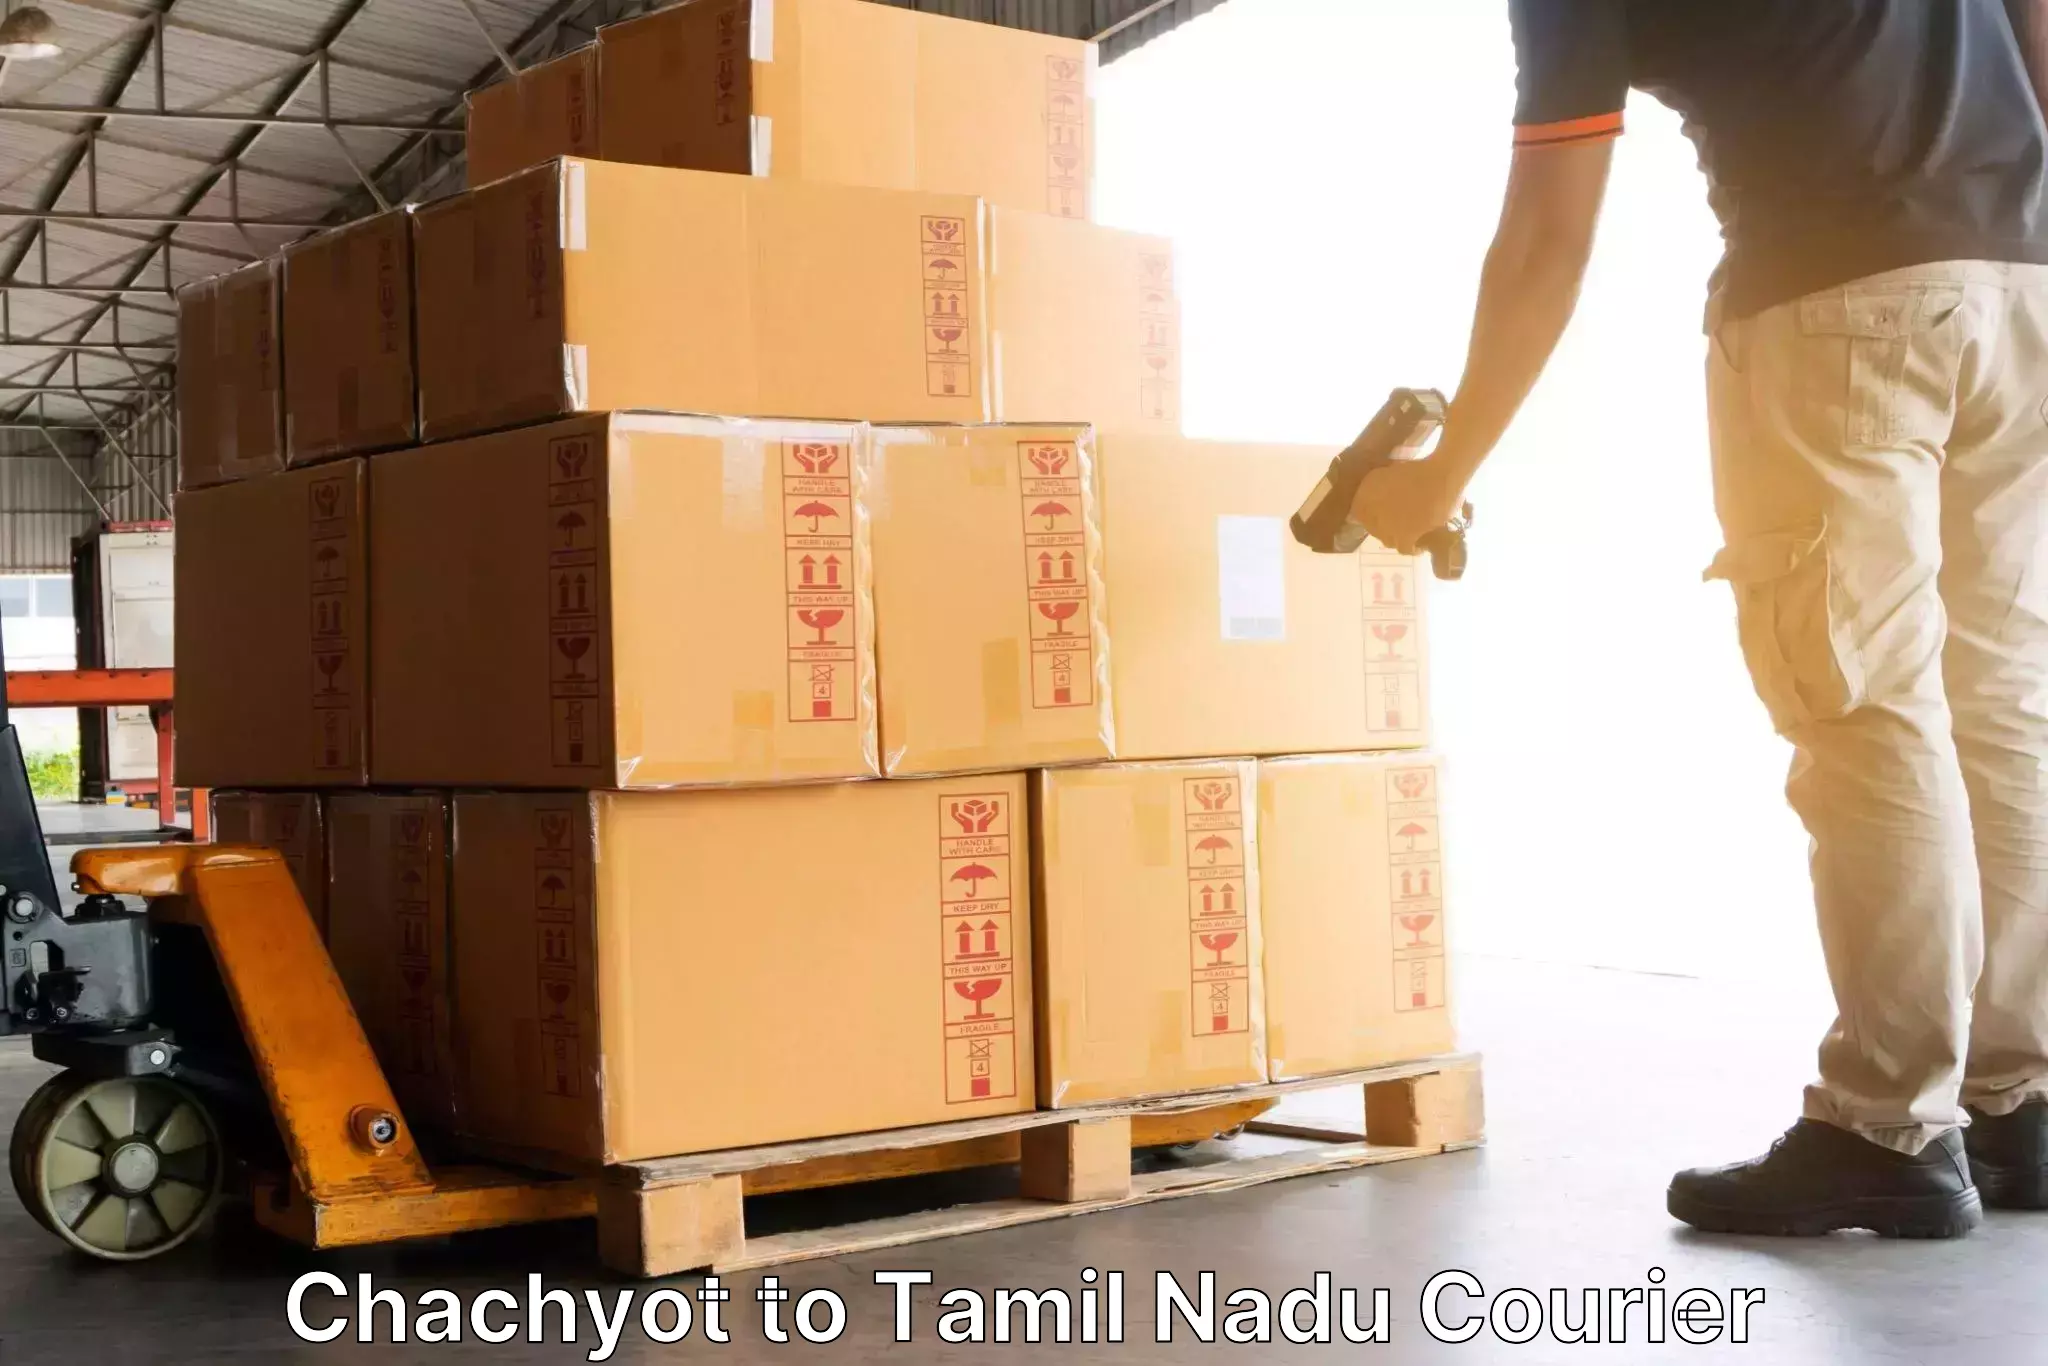 Efficient parcel delivery Chachyot to Tiruvannamalai